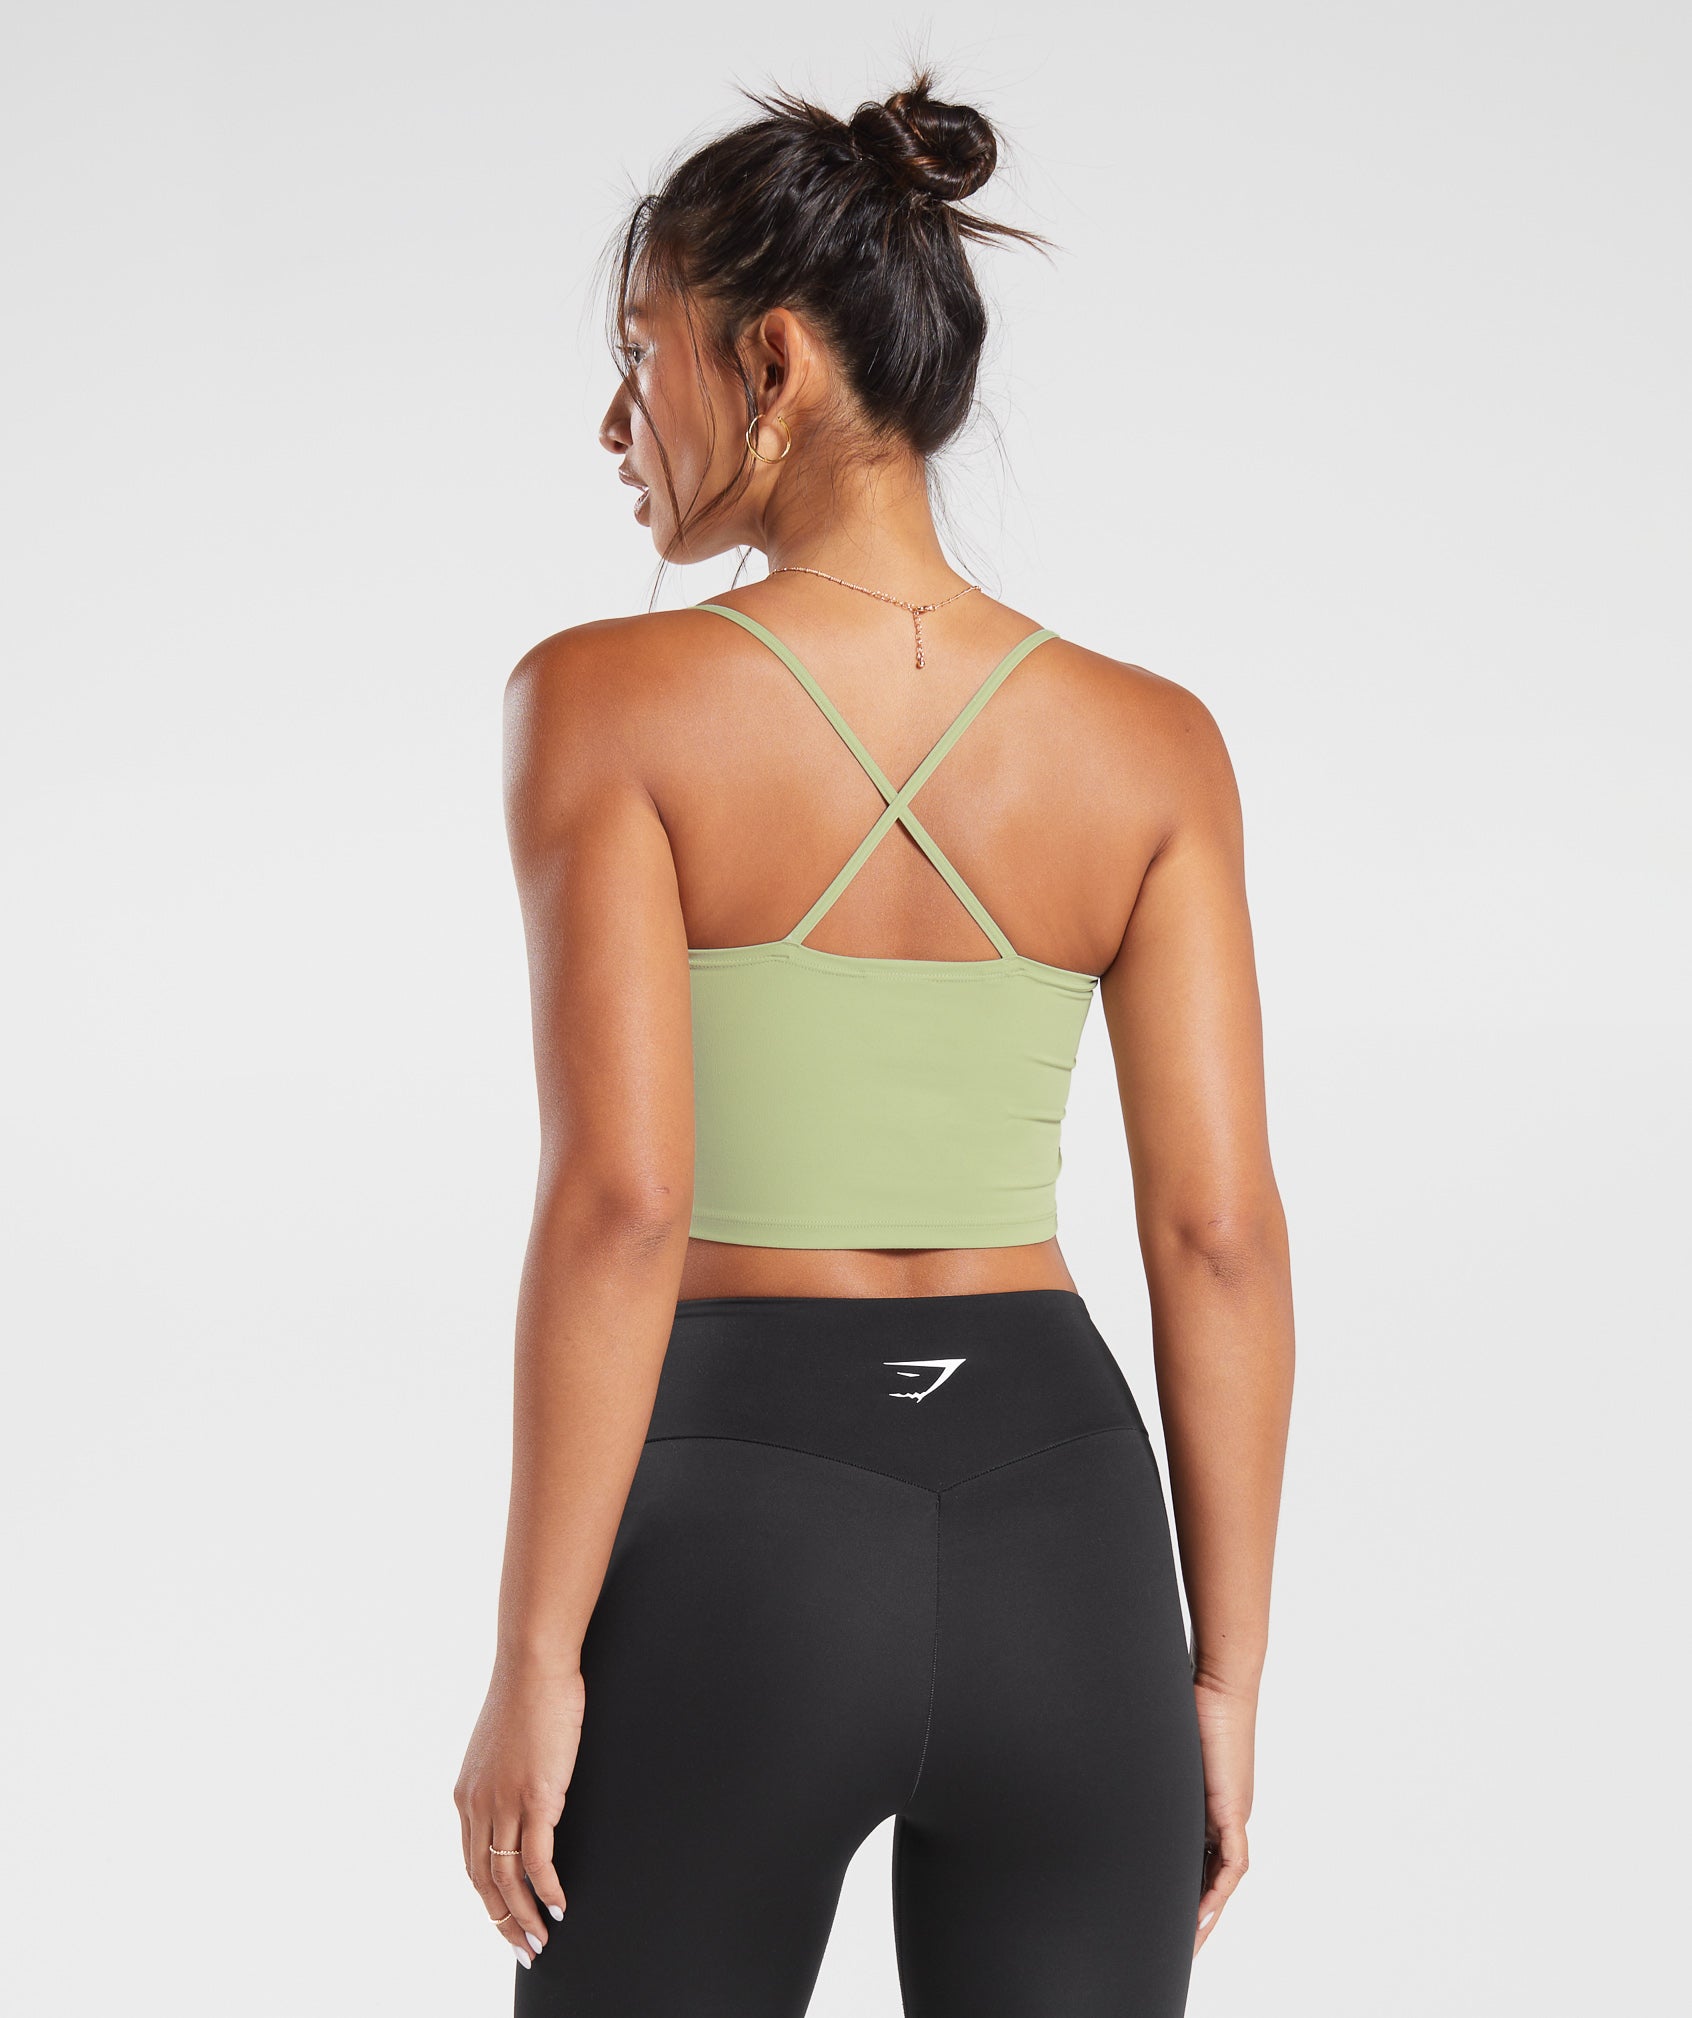 Functional & Fashionable Workout Gear For Women! - AbzStylz